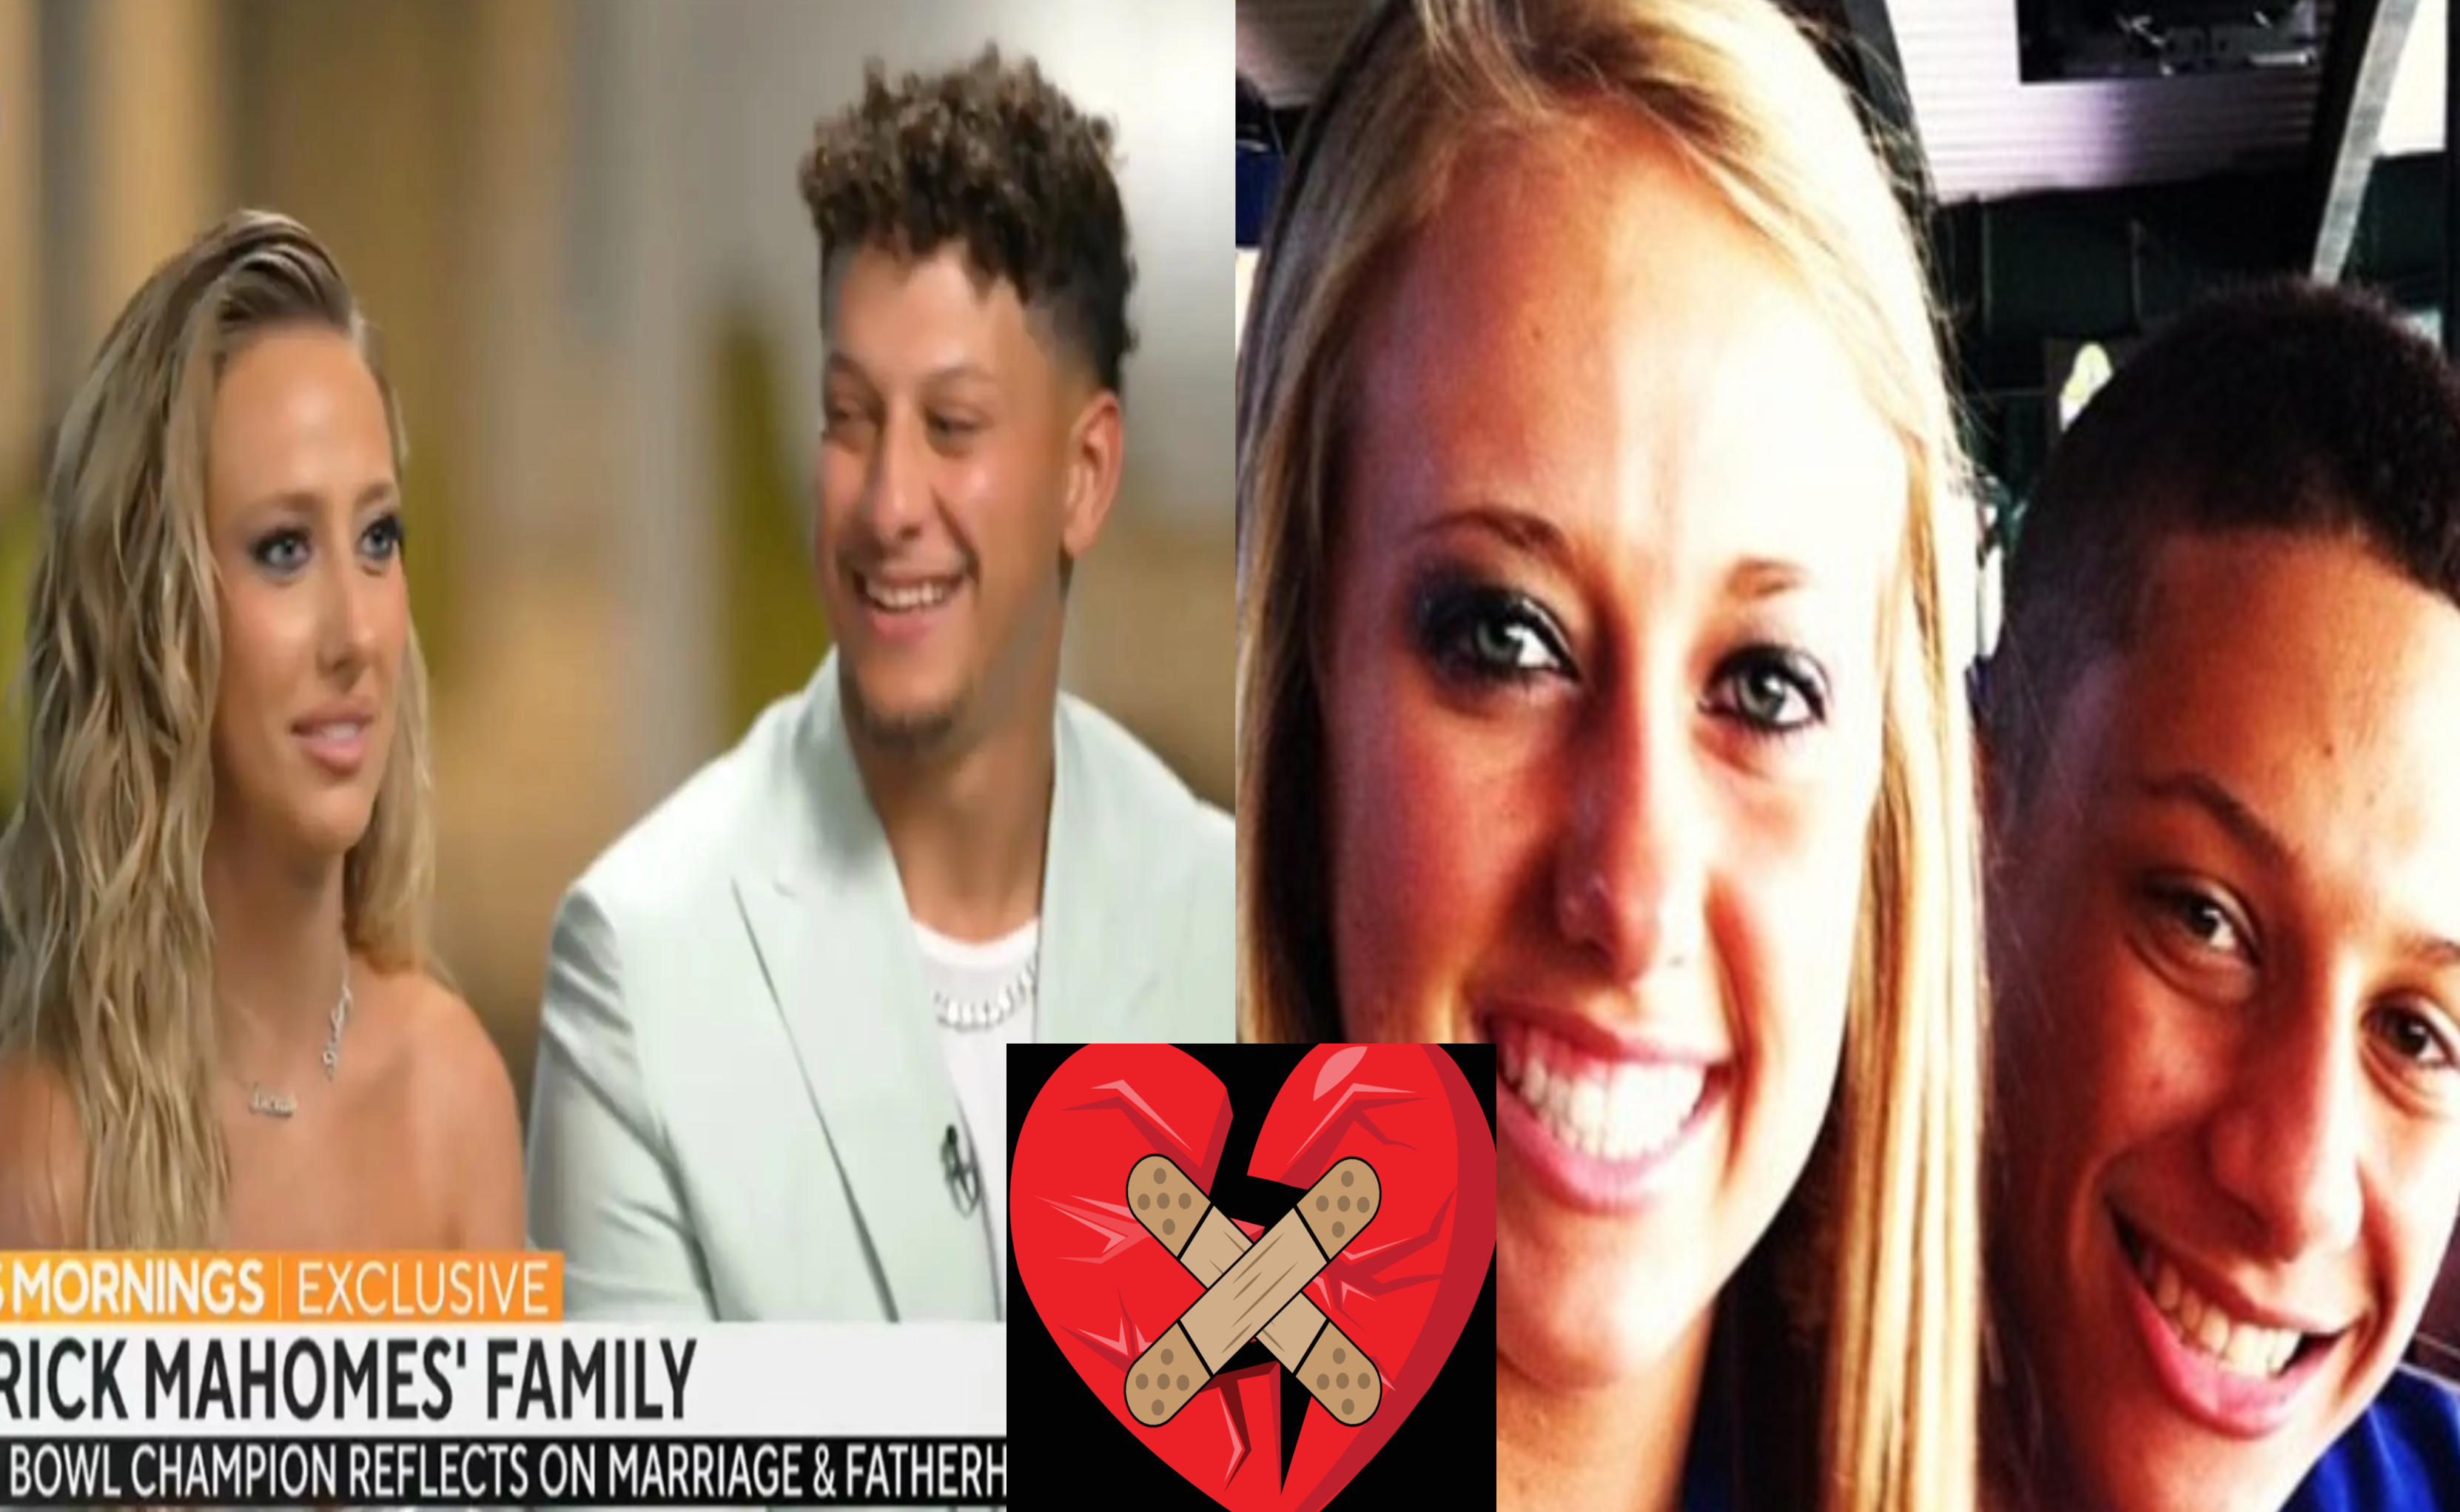 Patrick Mahomes and Brittany provide surprising reasons for ending their three-year marriage.